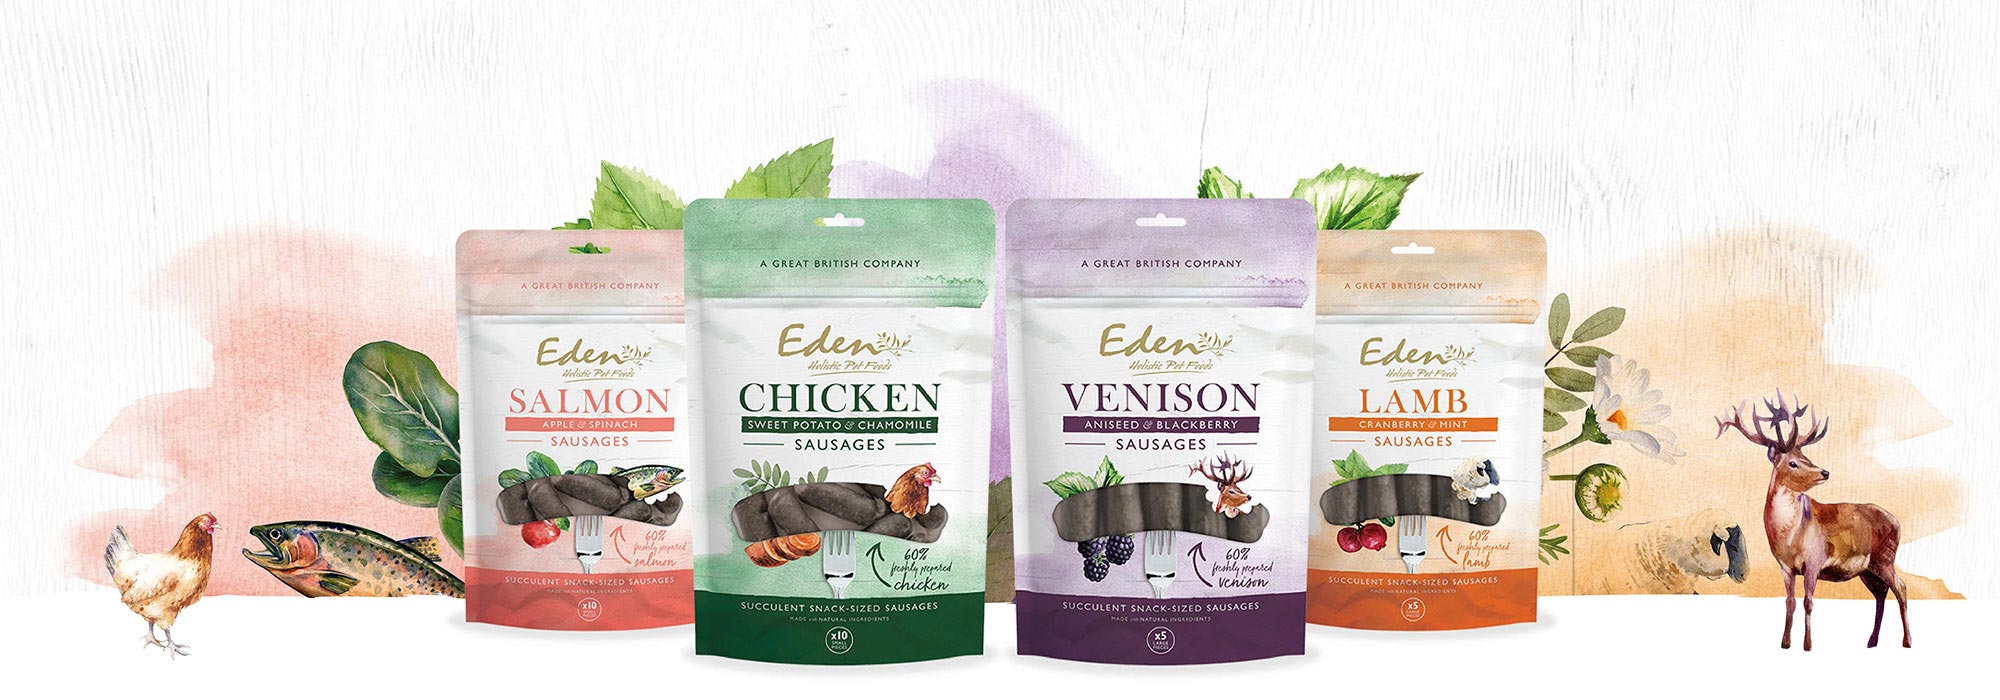 Eden Holistic Pet Foods launch a new product at Crufts